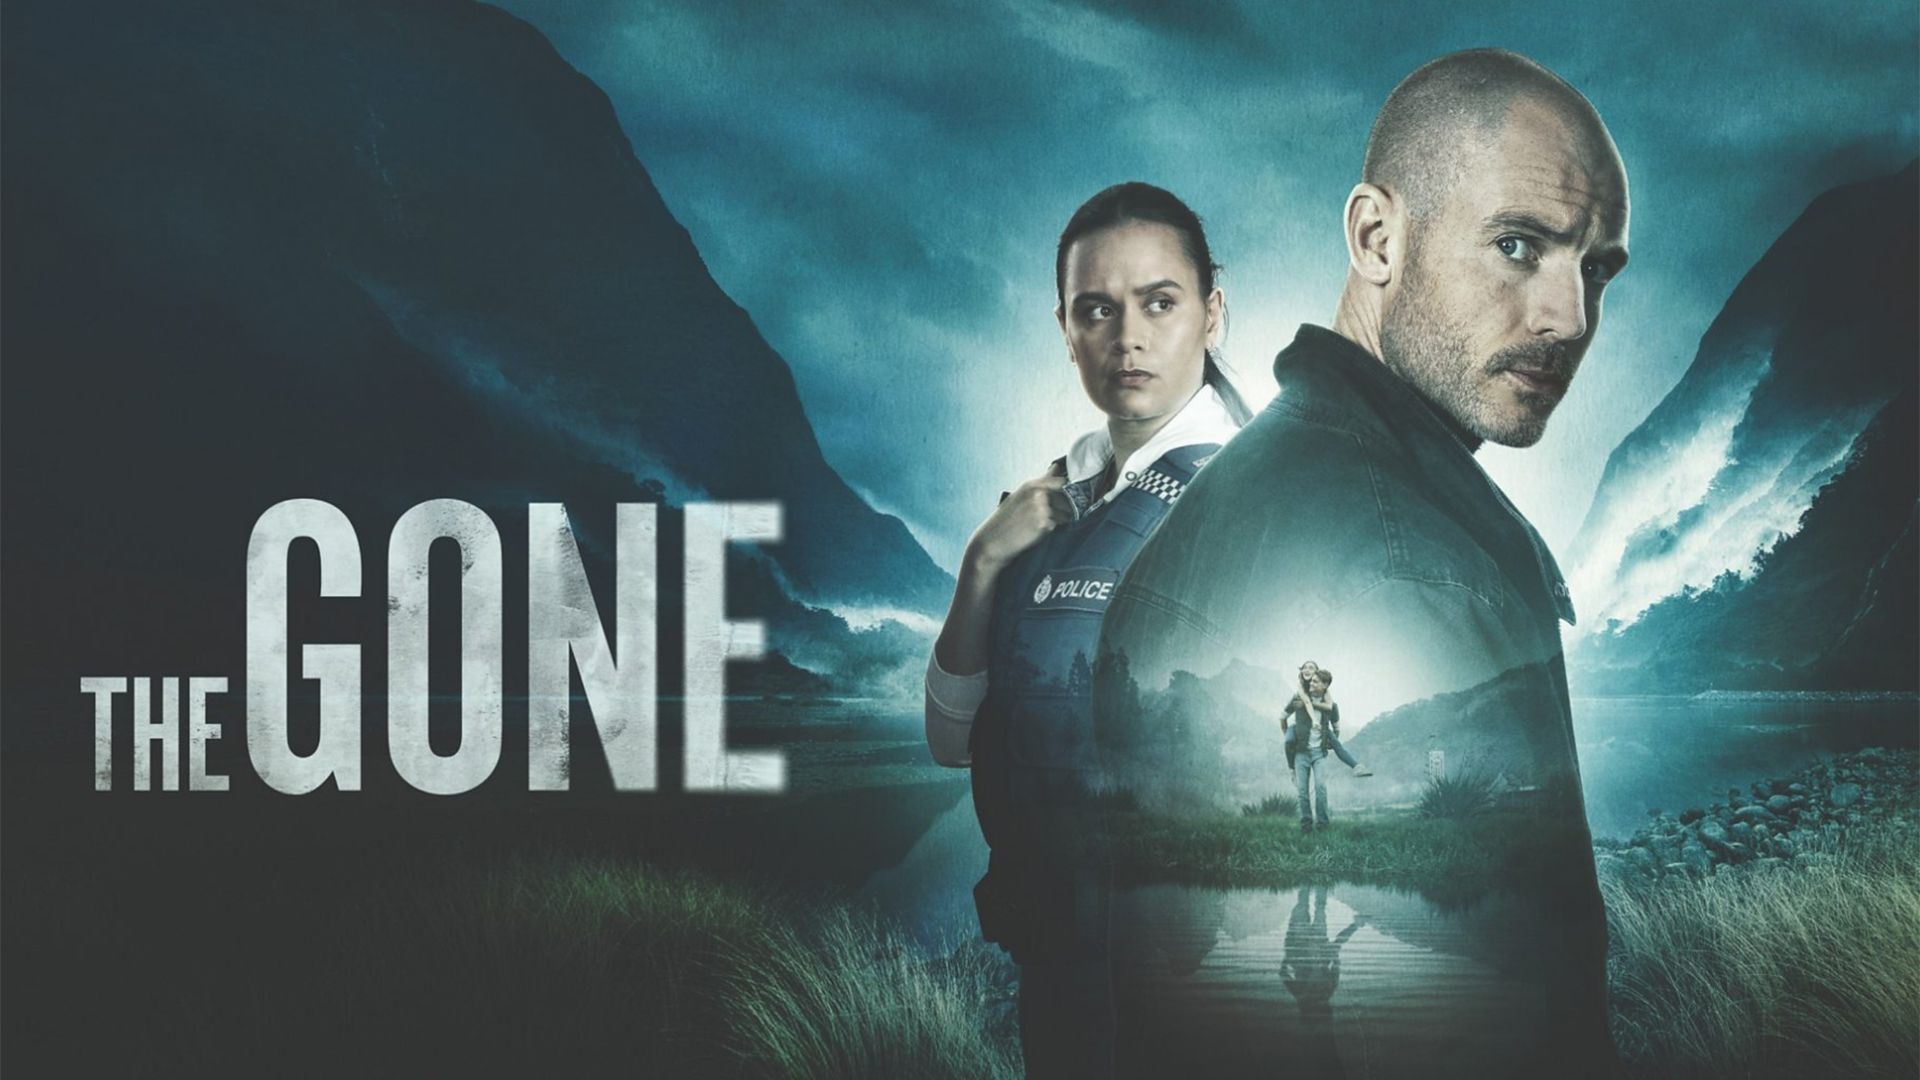 The Gone official poster